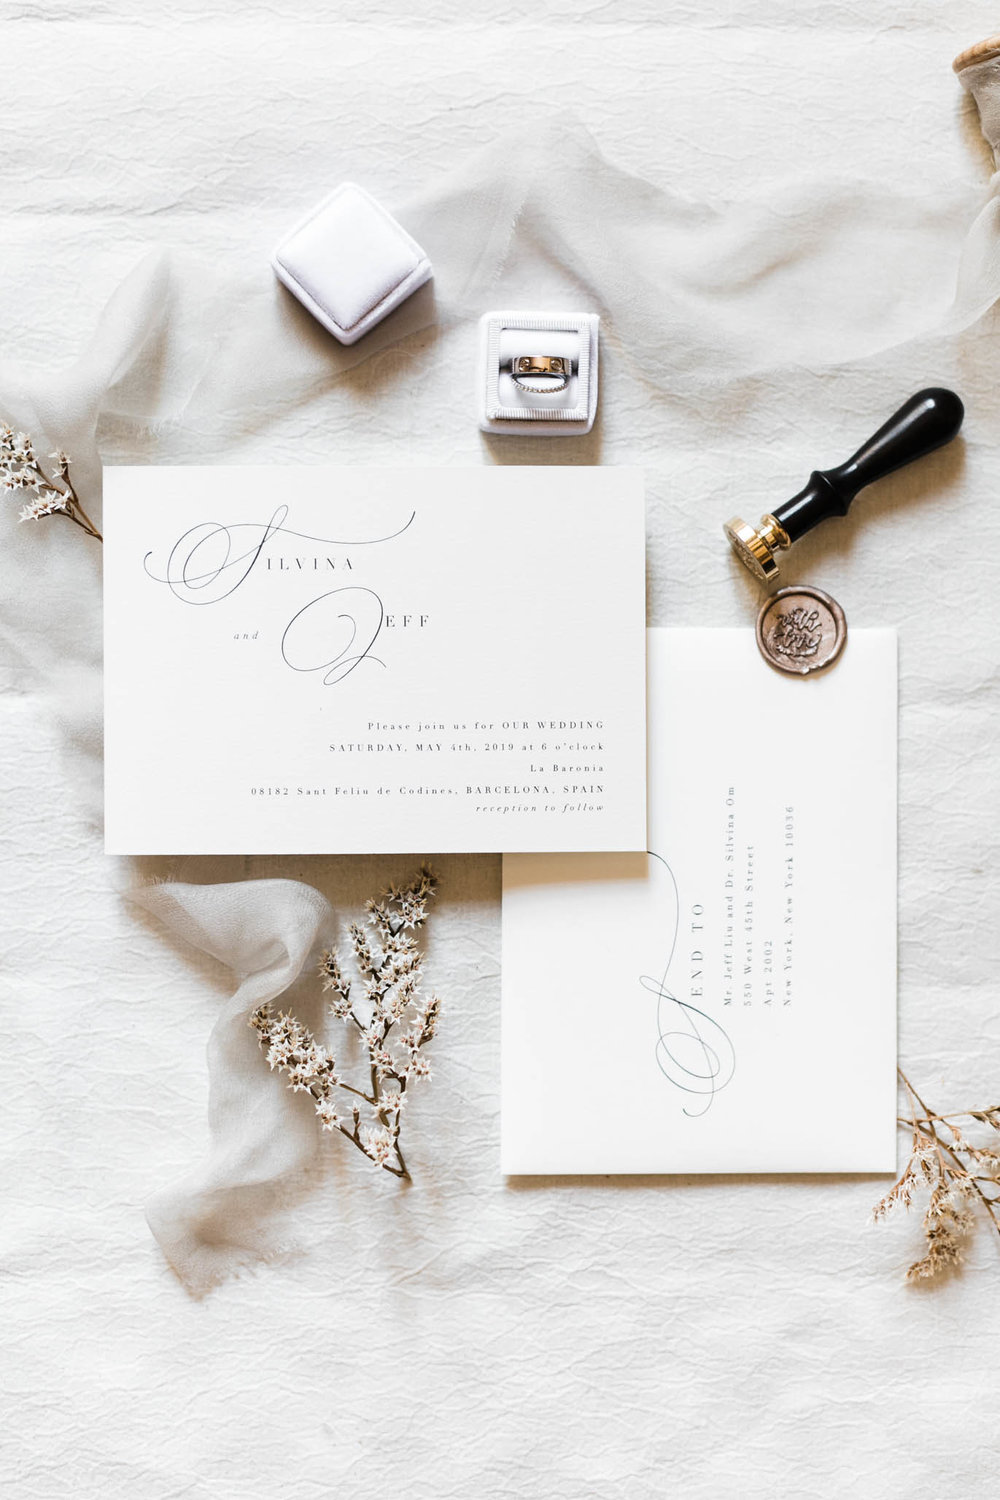 They went with pretty simple yet elegant invitations and I loved every bit of it.